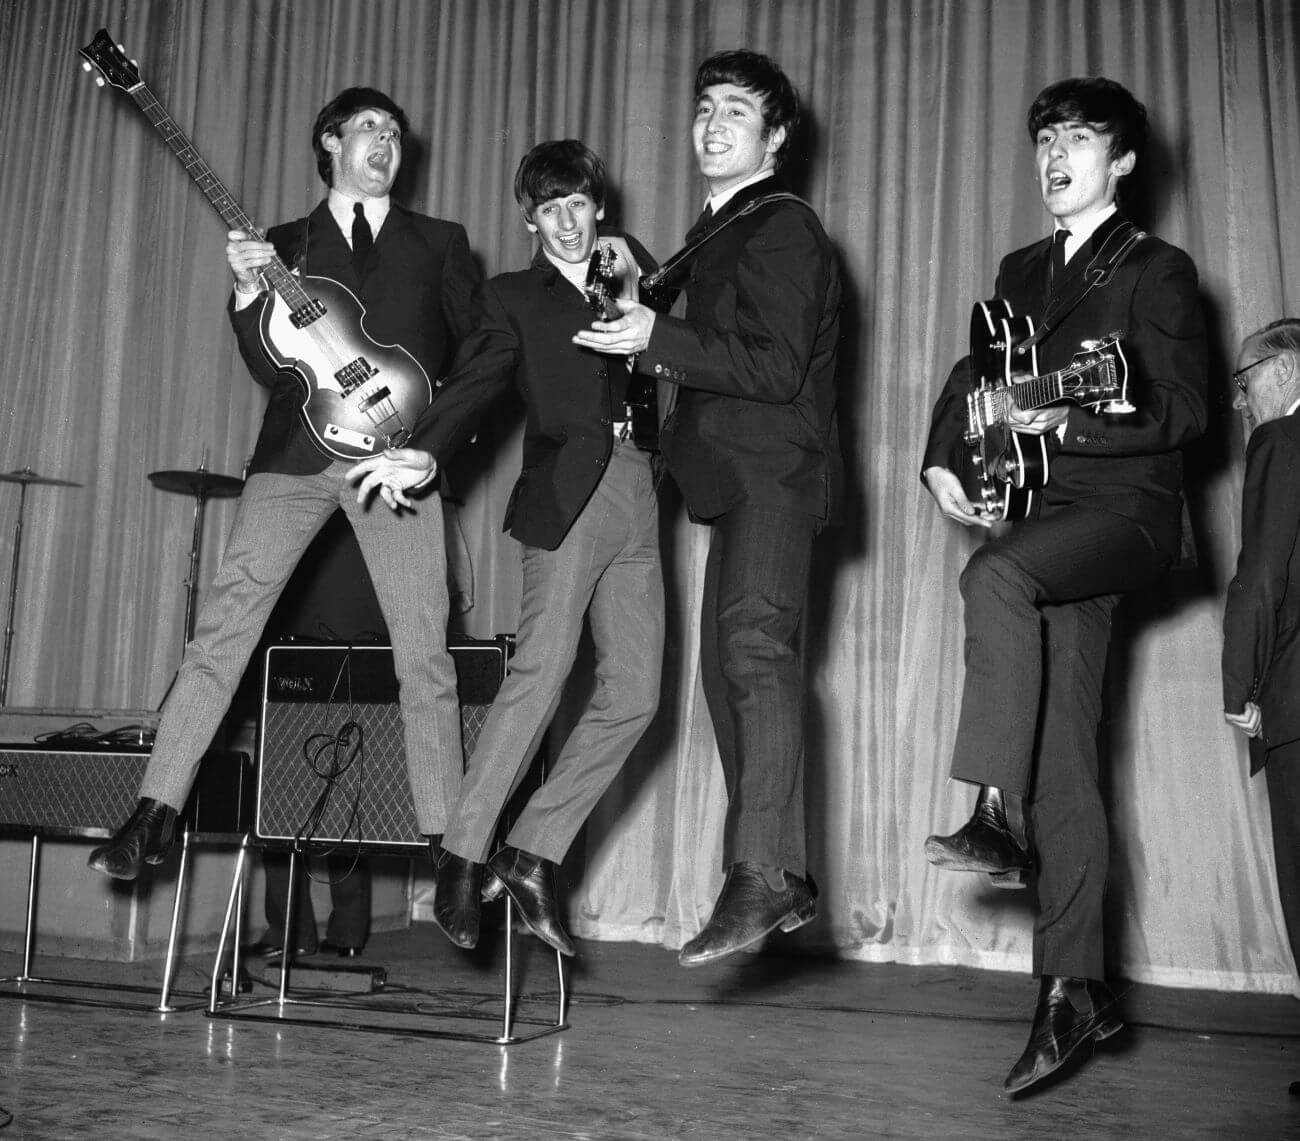 A black and white picture of Paul McCartney, Ringo Starr, John Lennon, and George Harrison wearing suits and jumping in the air on a stage.